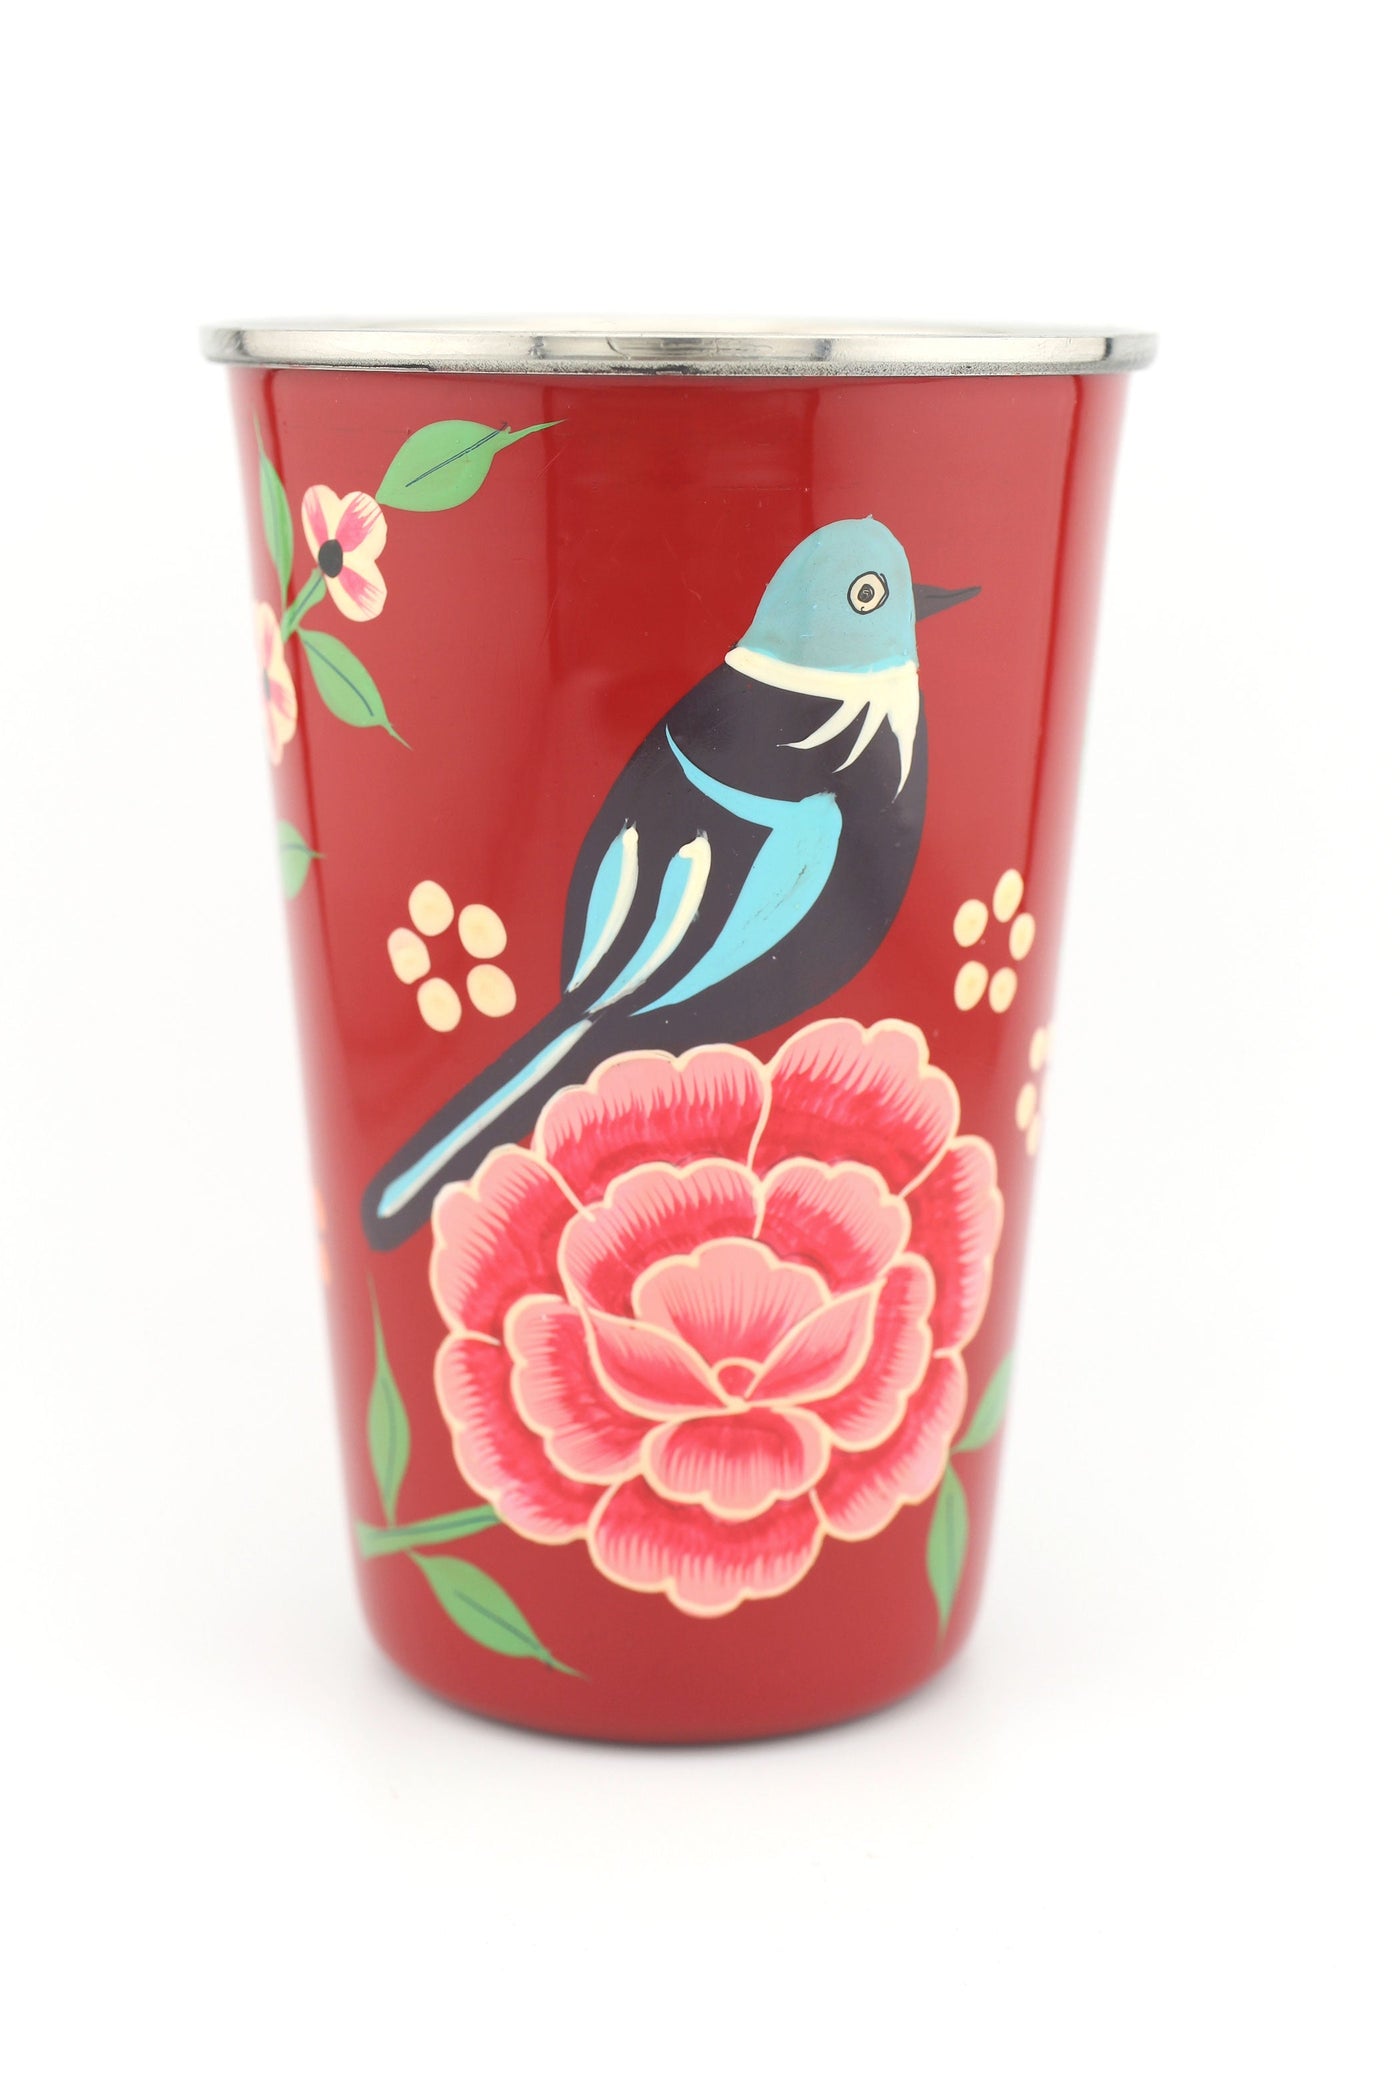 Floral Handpainted Stainless Steel Tumbler Cup, from Kashmir